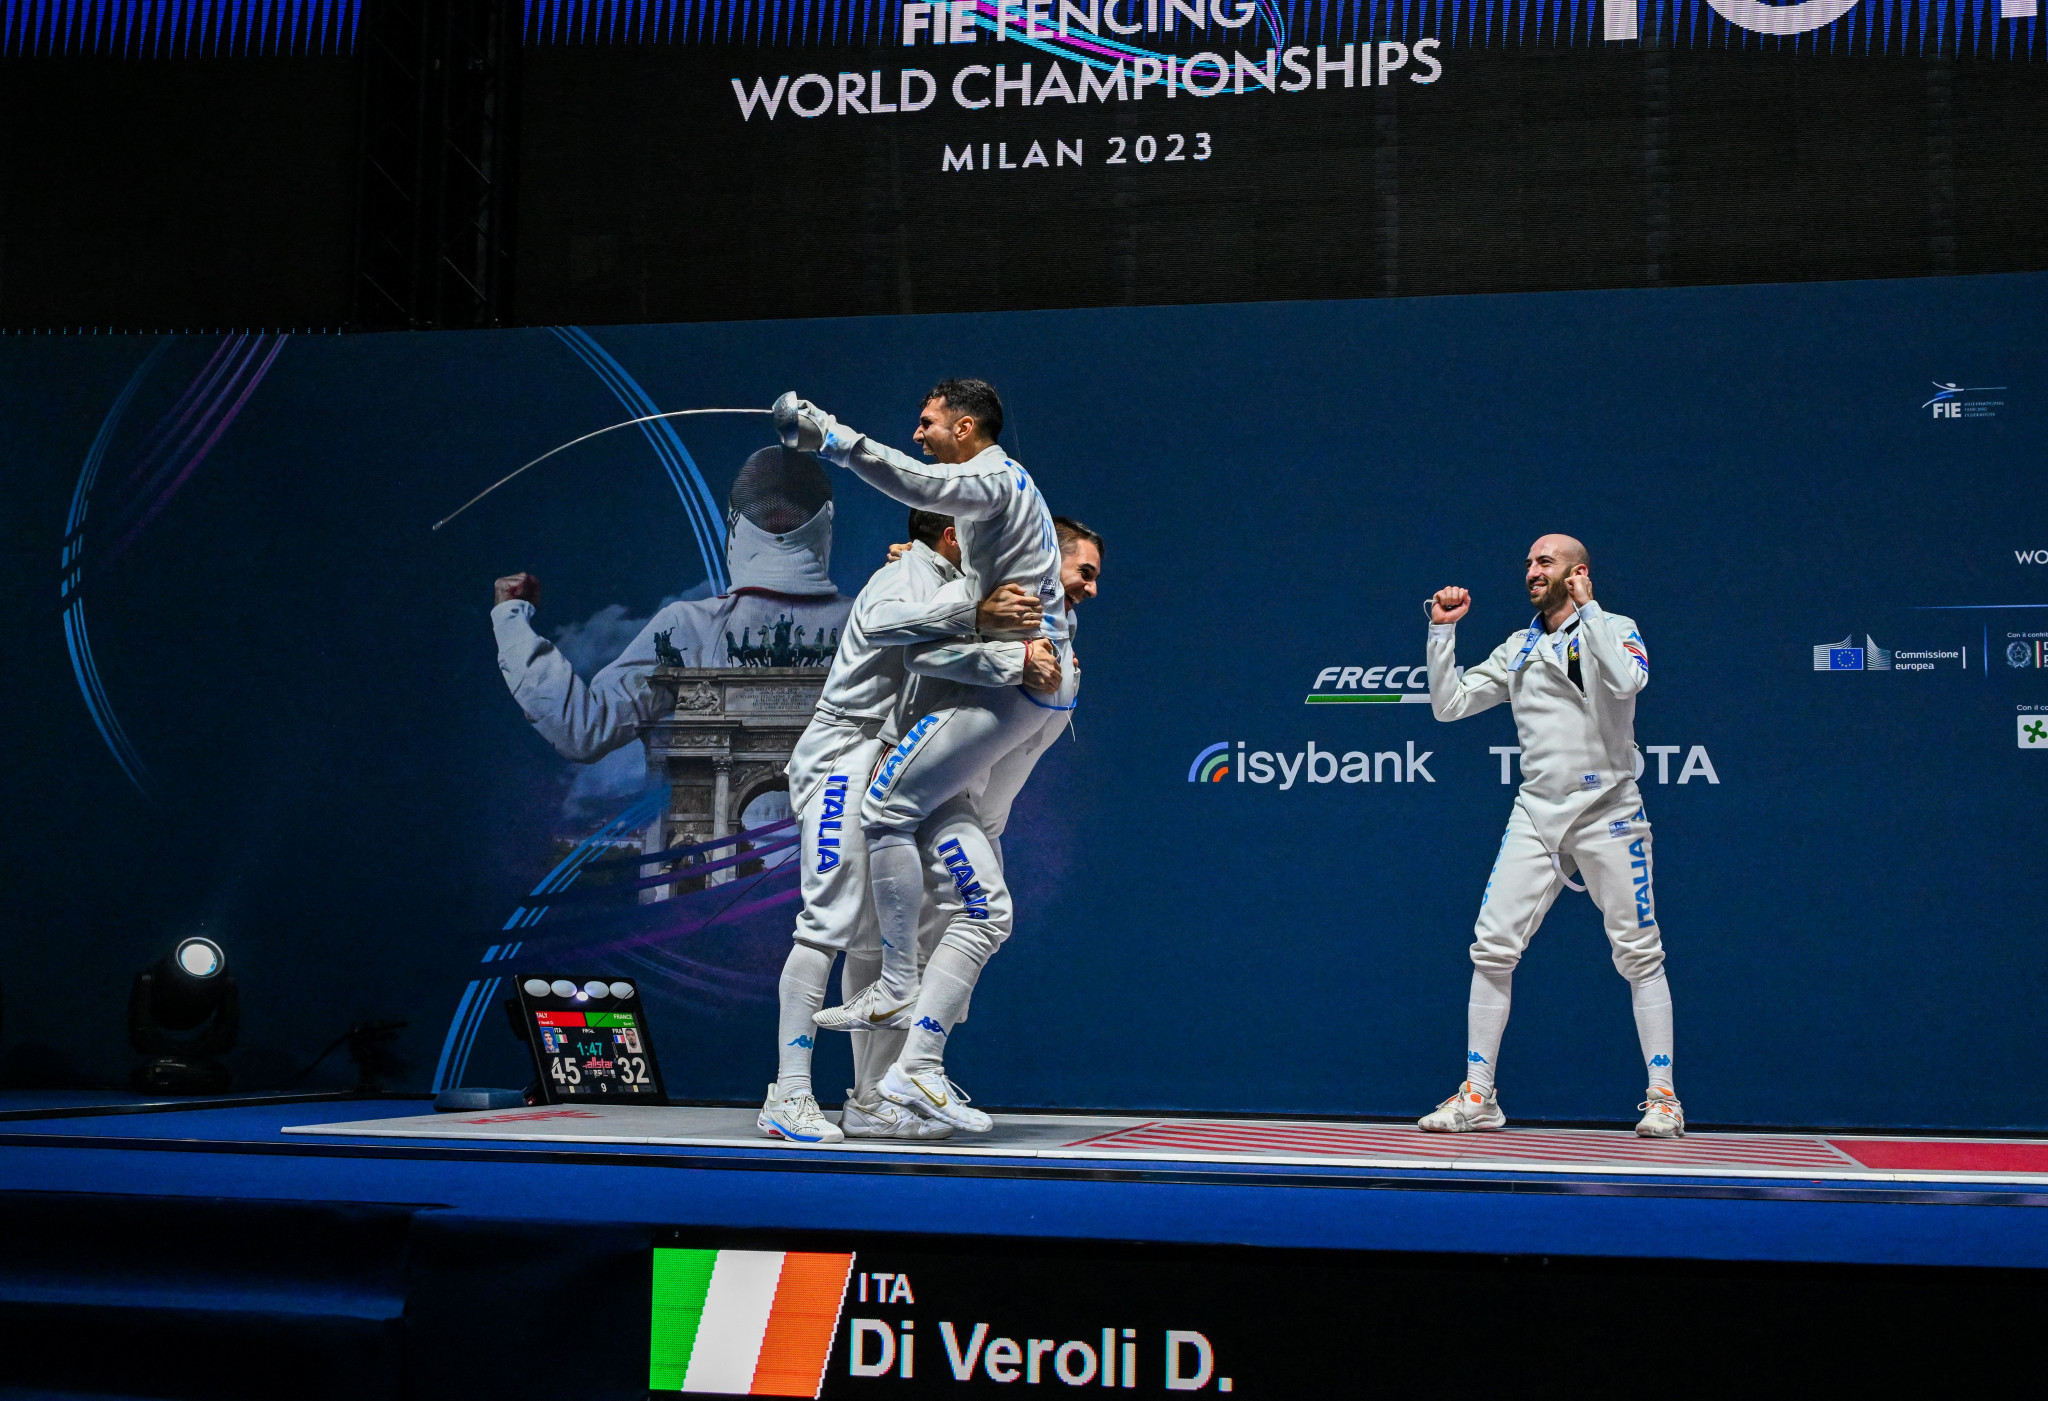 Italy took gold in the men's team épée ©Getty Images